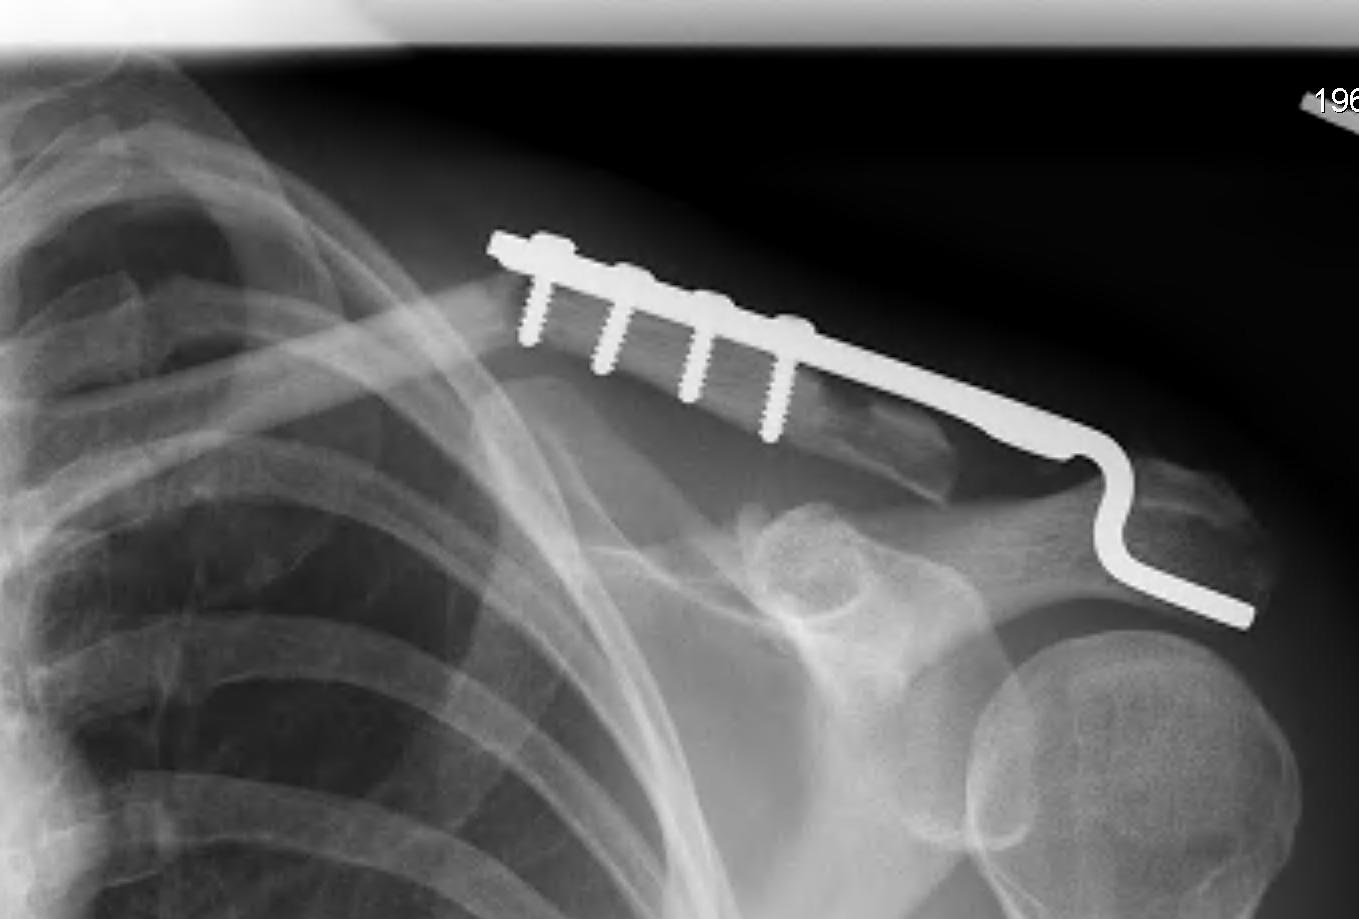 Clavicle Hook Plate Fracture